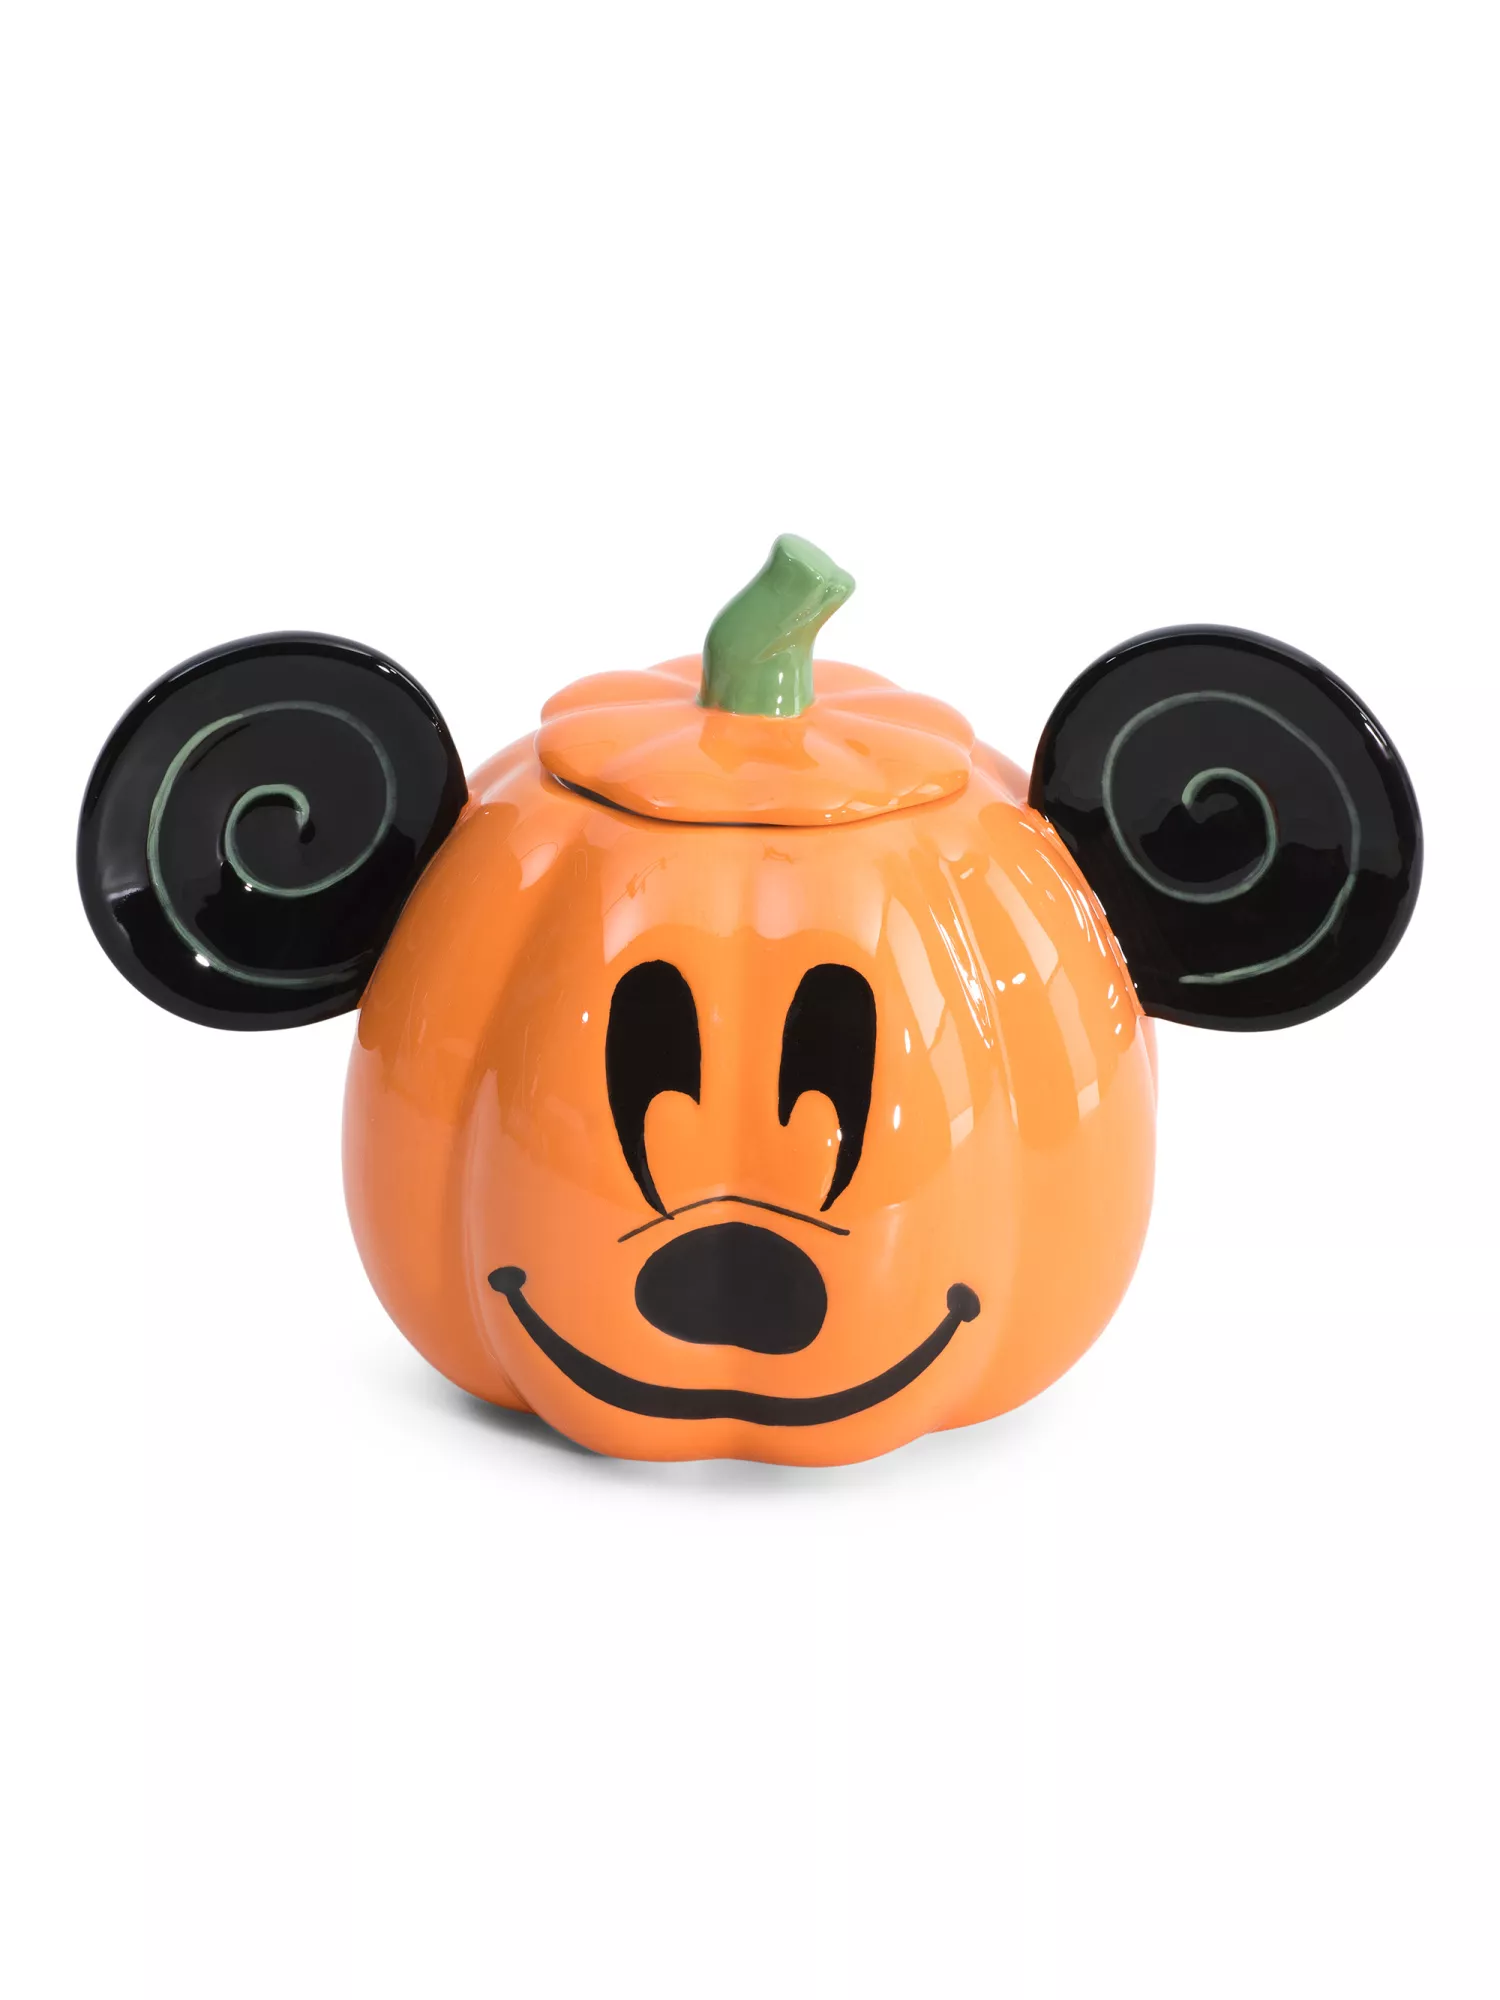 Shop the Viral Light-Up Mickey Mouse Head For Halloween